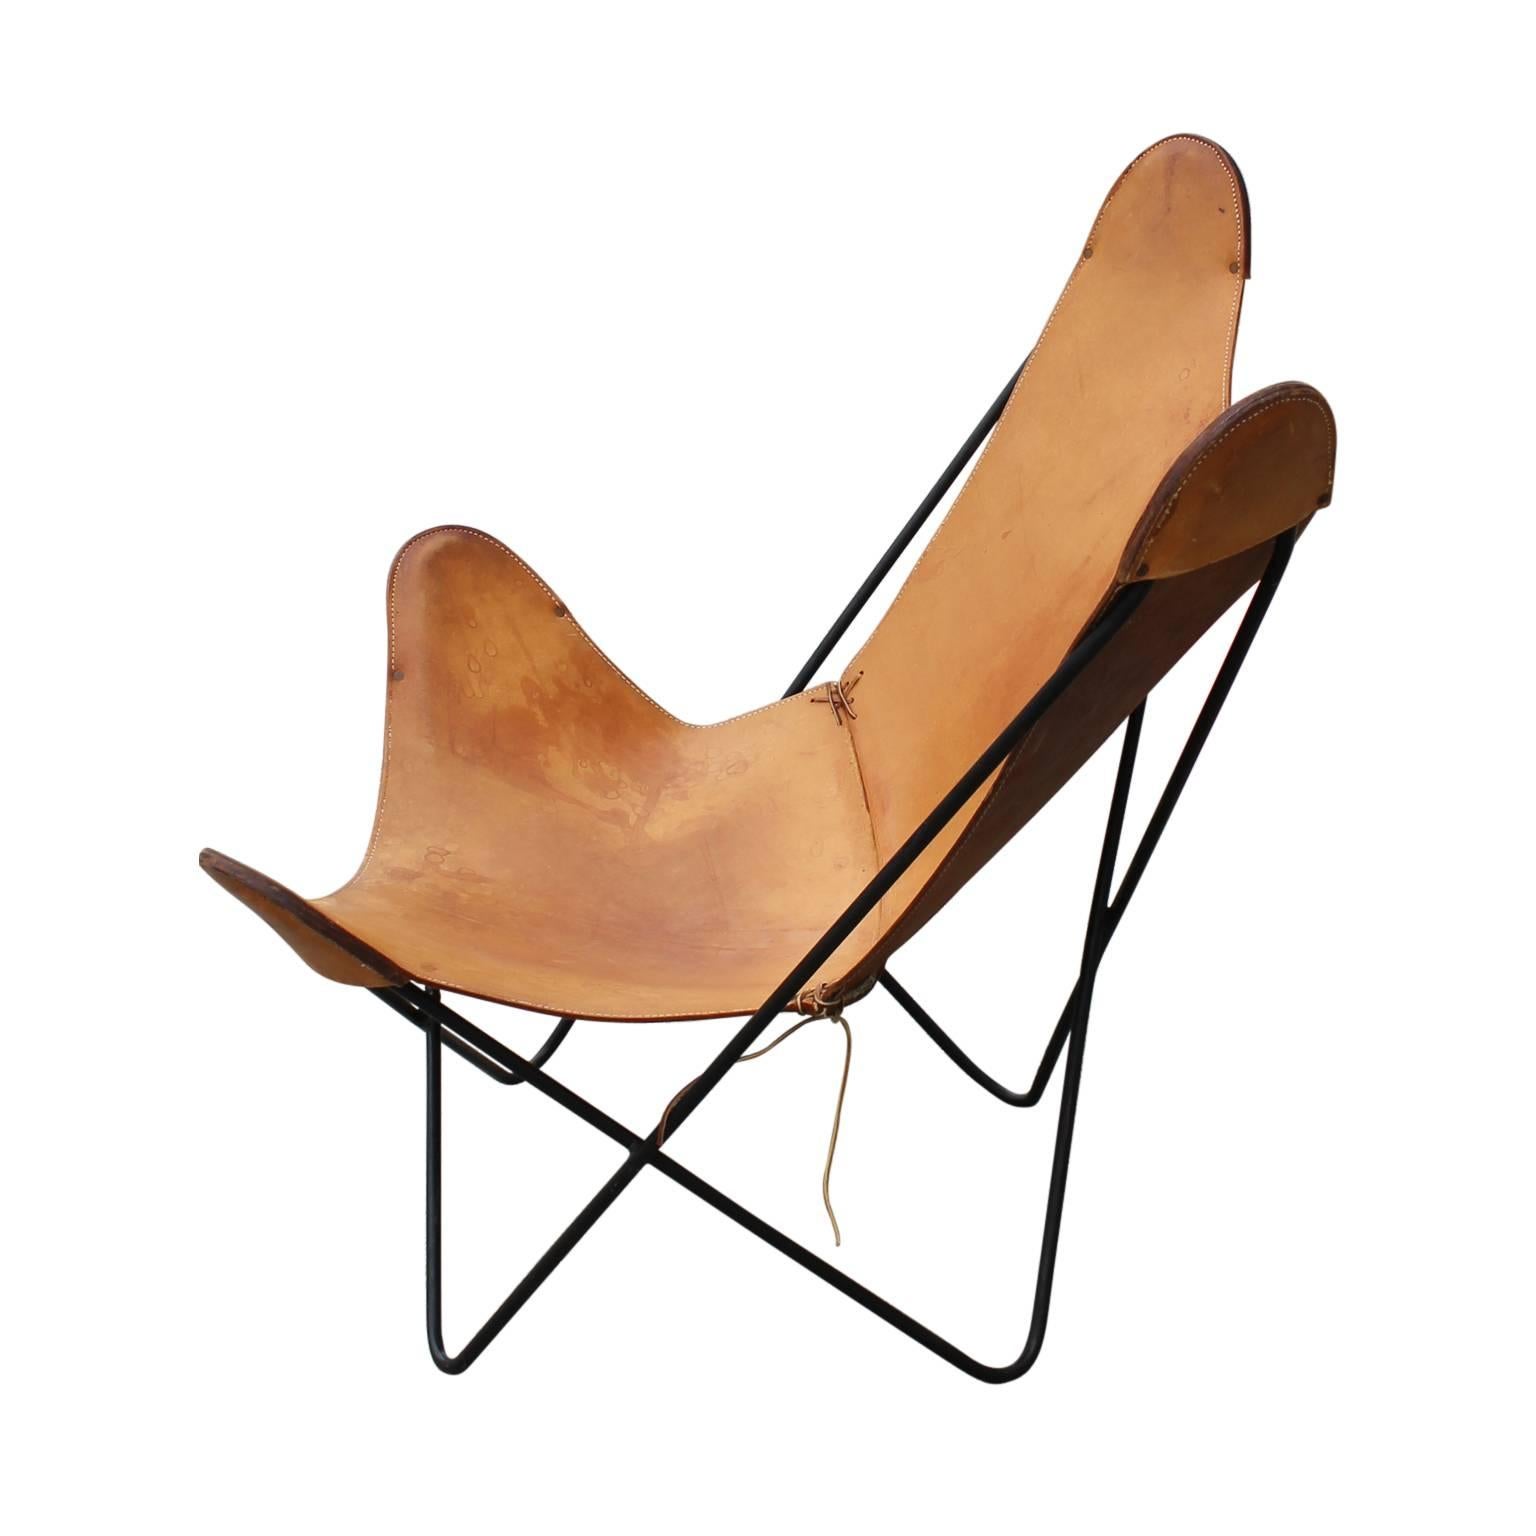 Gorgeous modern Knoll light brown leather butterfly chair with and iron frame.